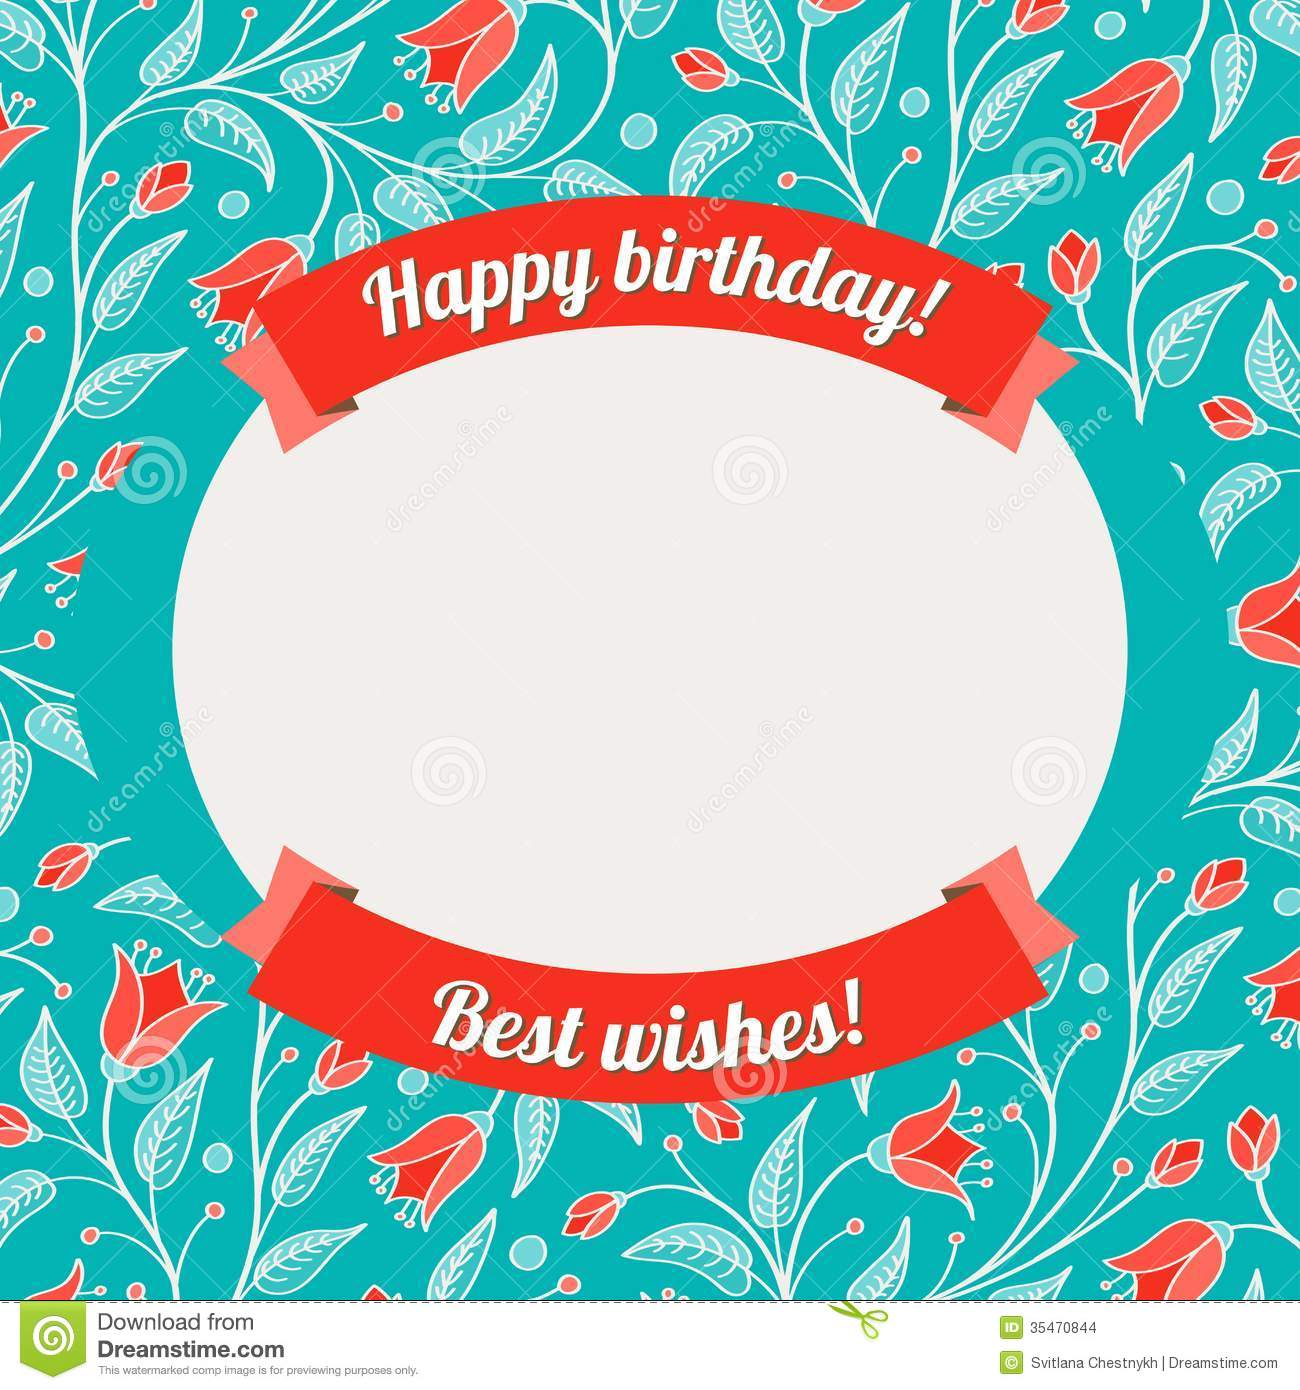 Birthday Card Greeting Ideas 012 Template For Birthday Card Ideas Greeting Invitation Floral